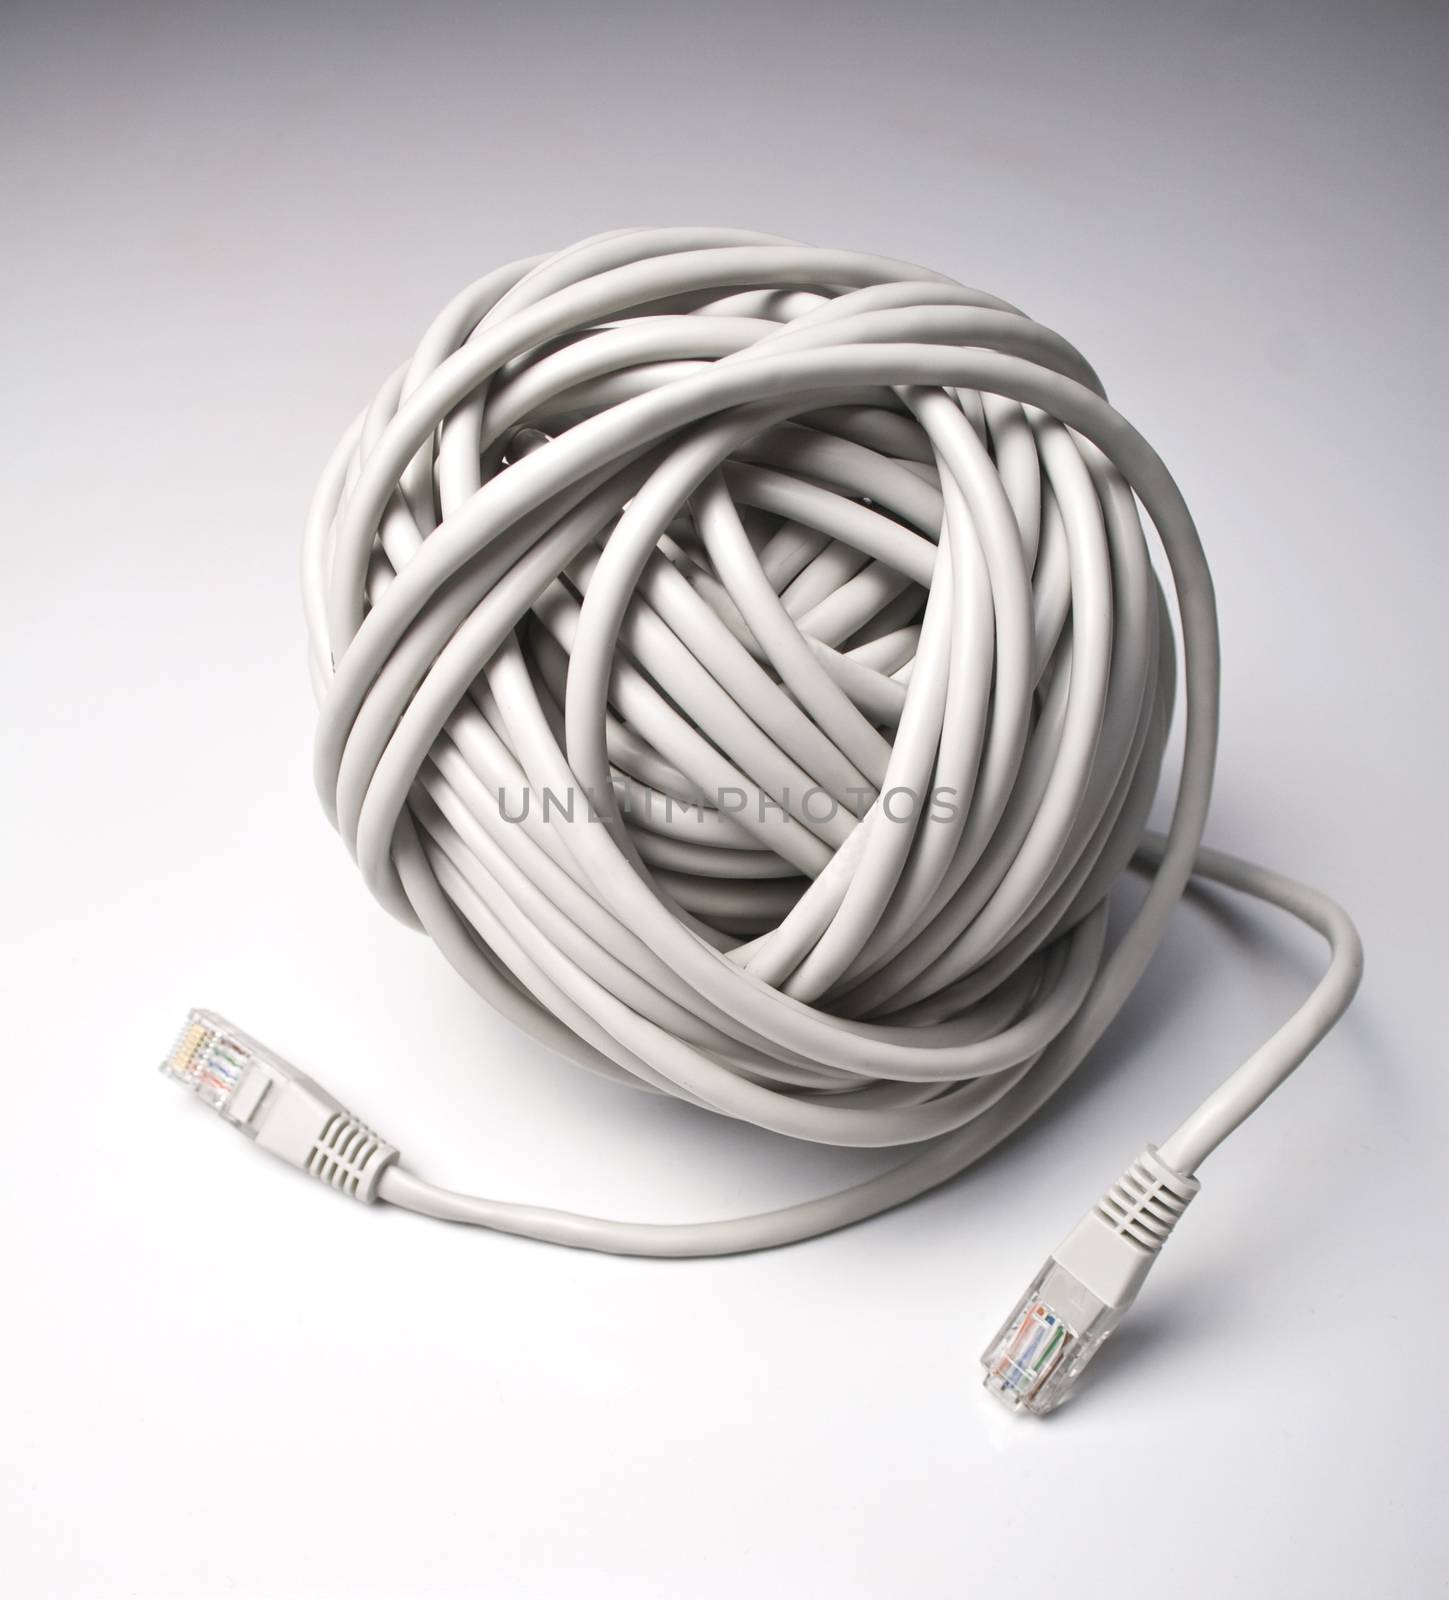 Rolled computer cables on grey background indicating a network problem